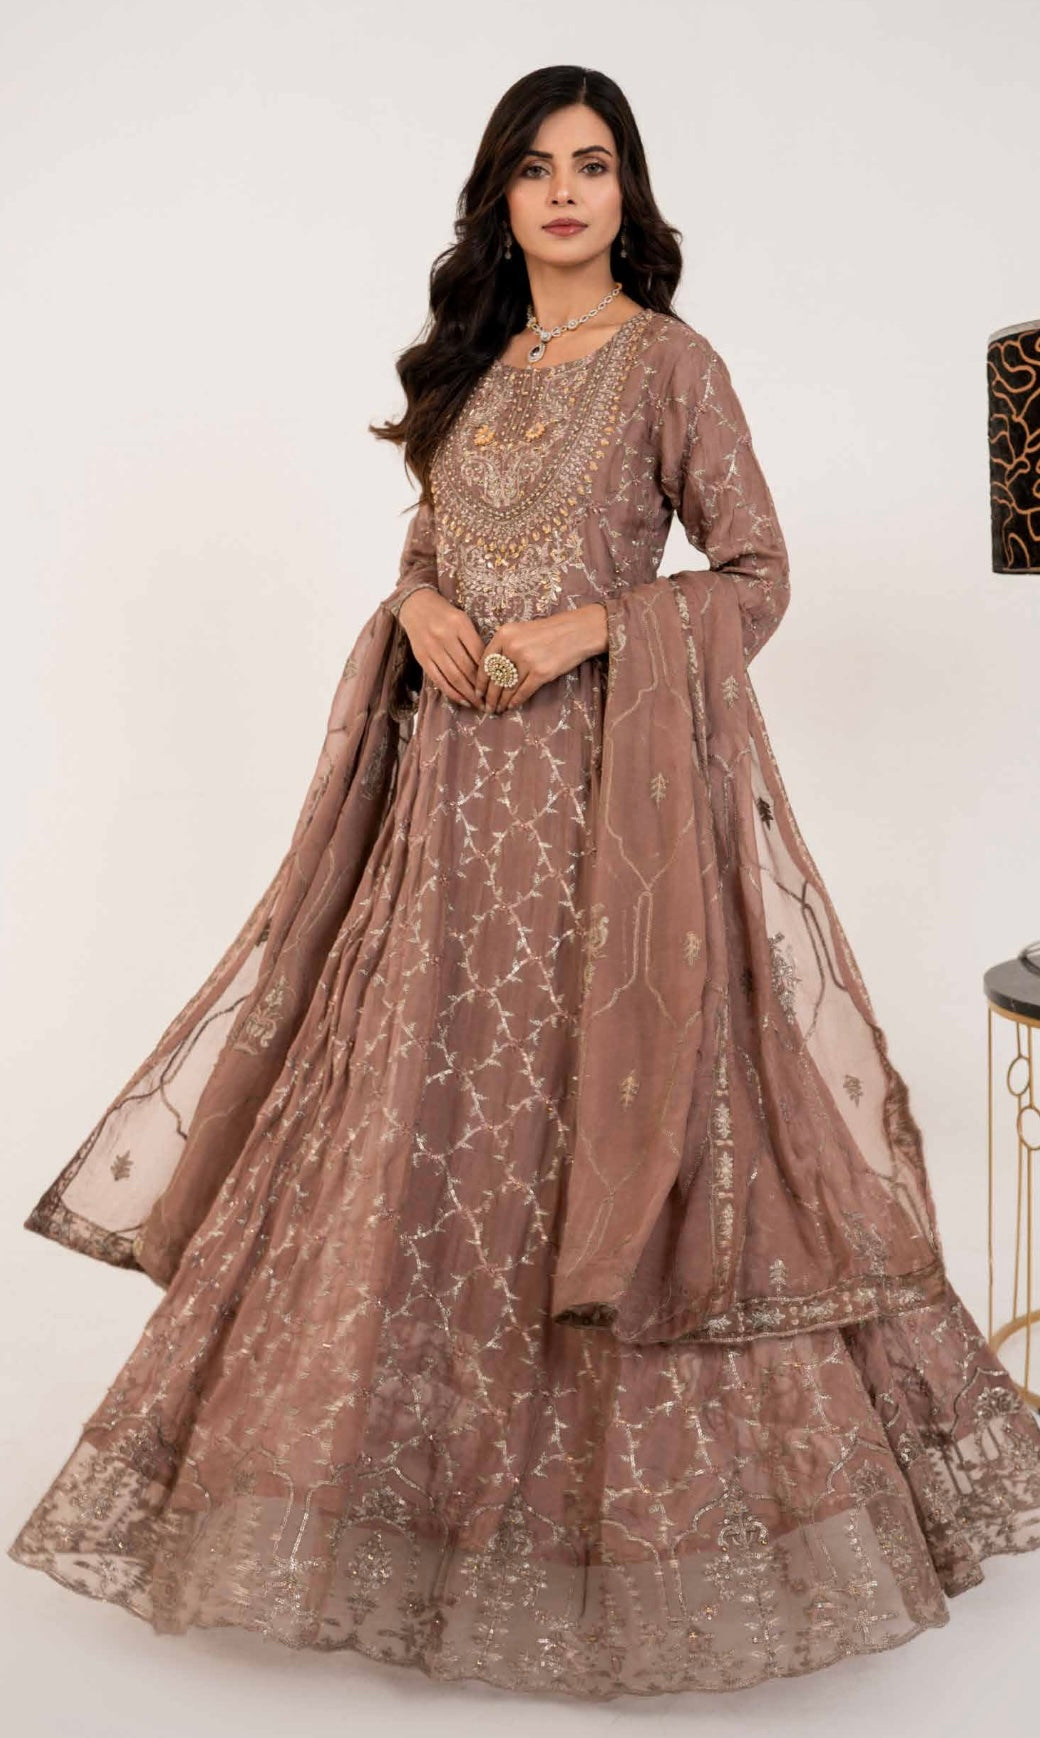 SIMRANS Shahjahan 3 piece embroidered chiffon long style dress -3525